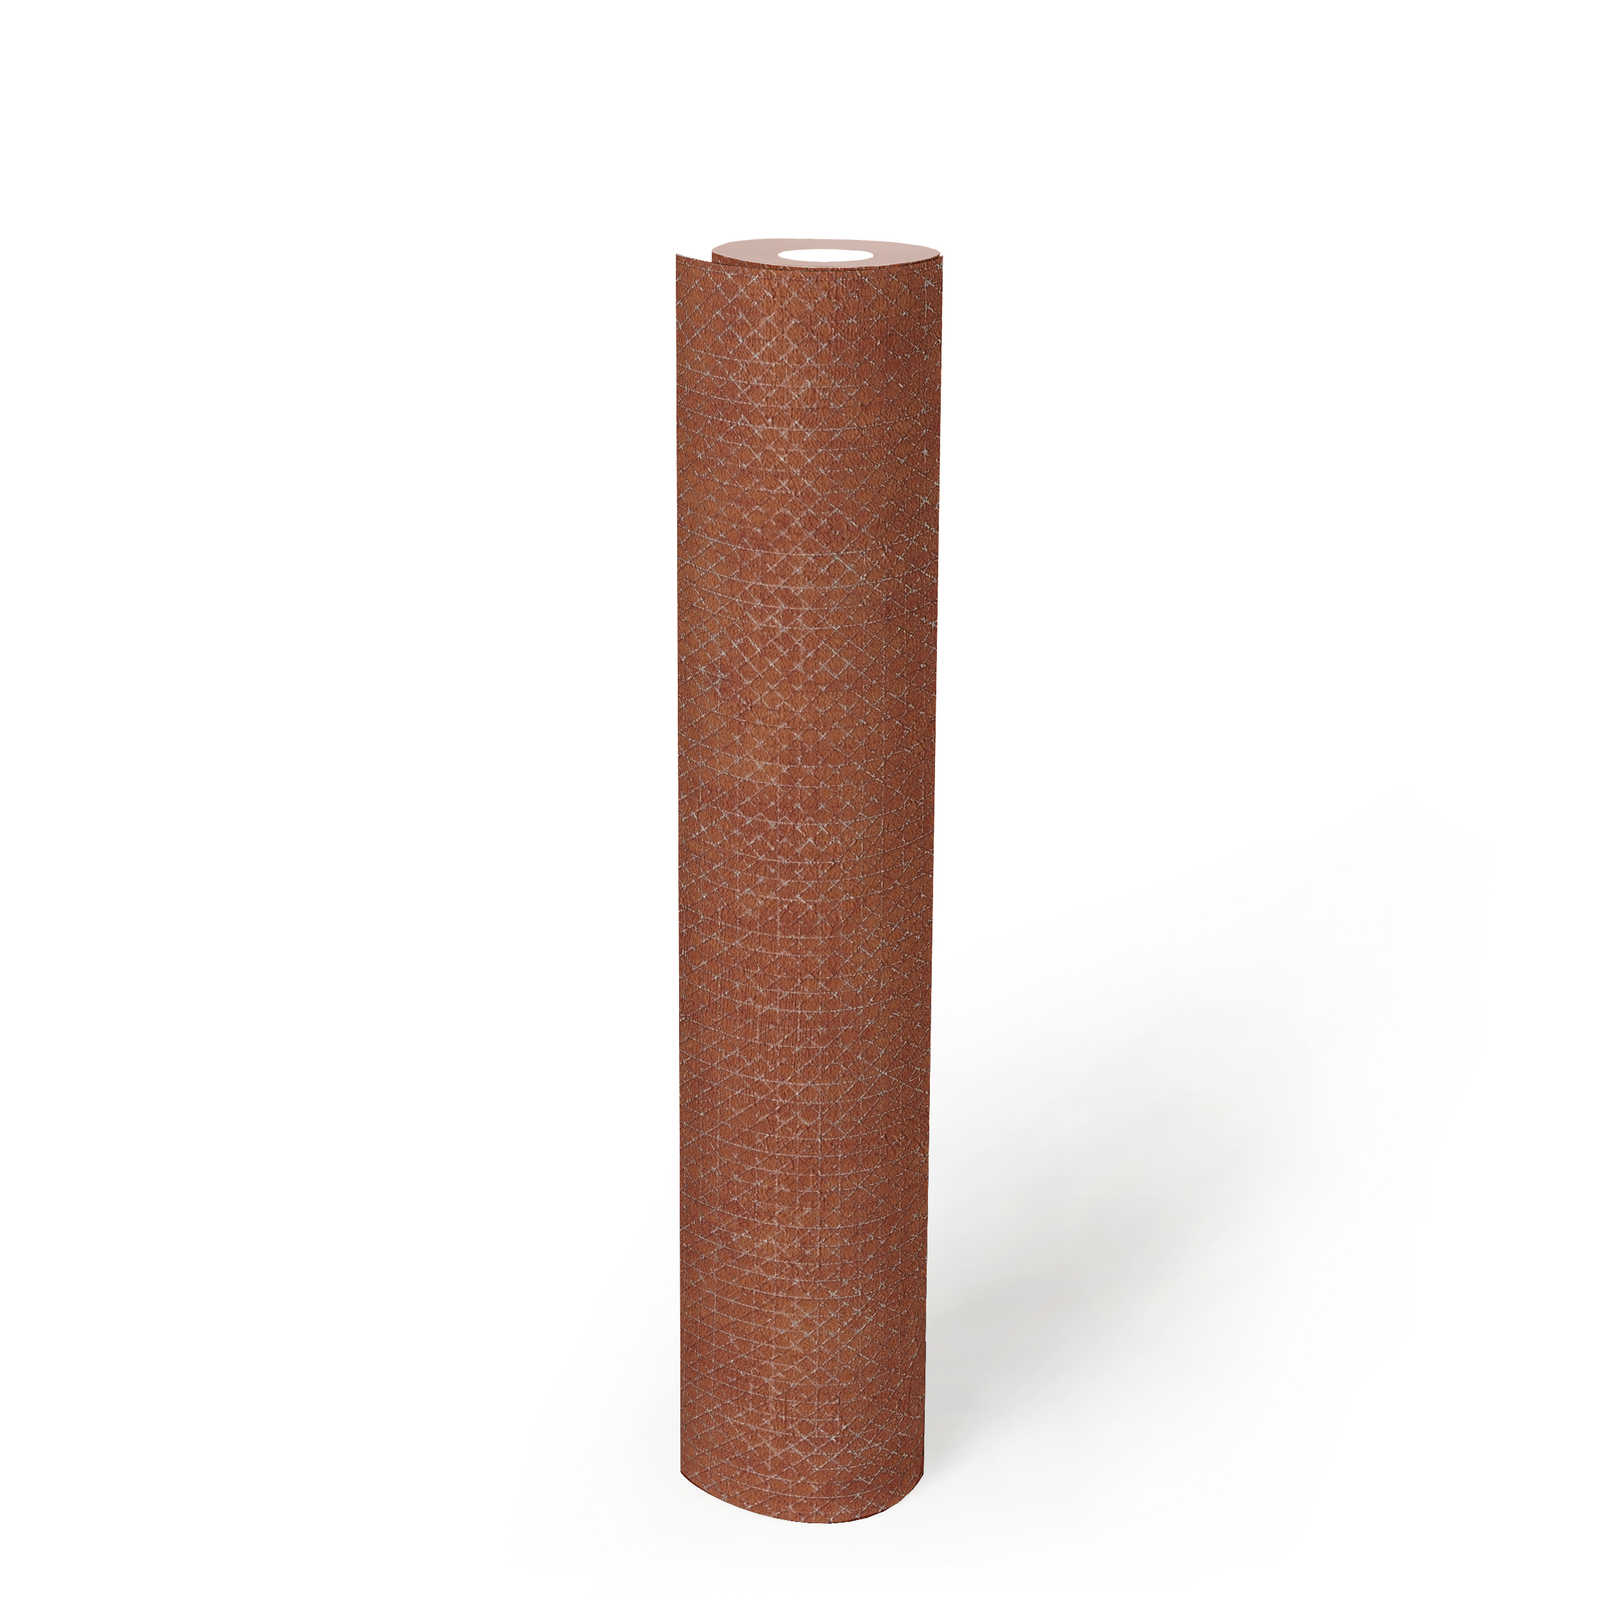             Brick red wallpaper with silver texture pattern - orange, red
        